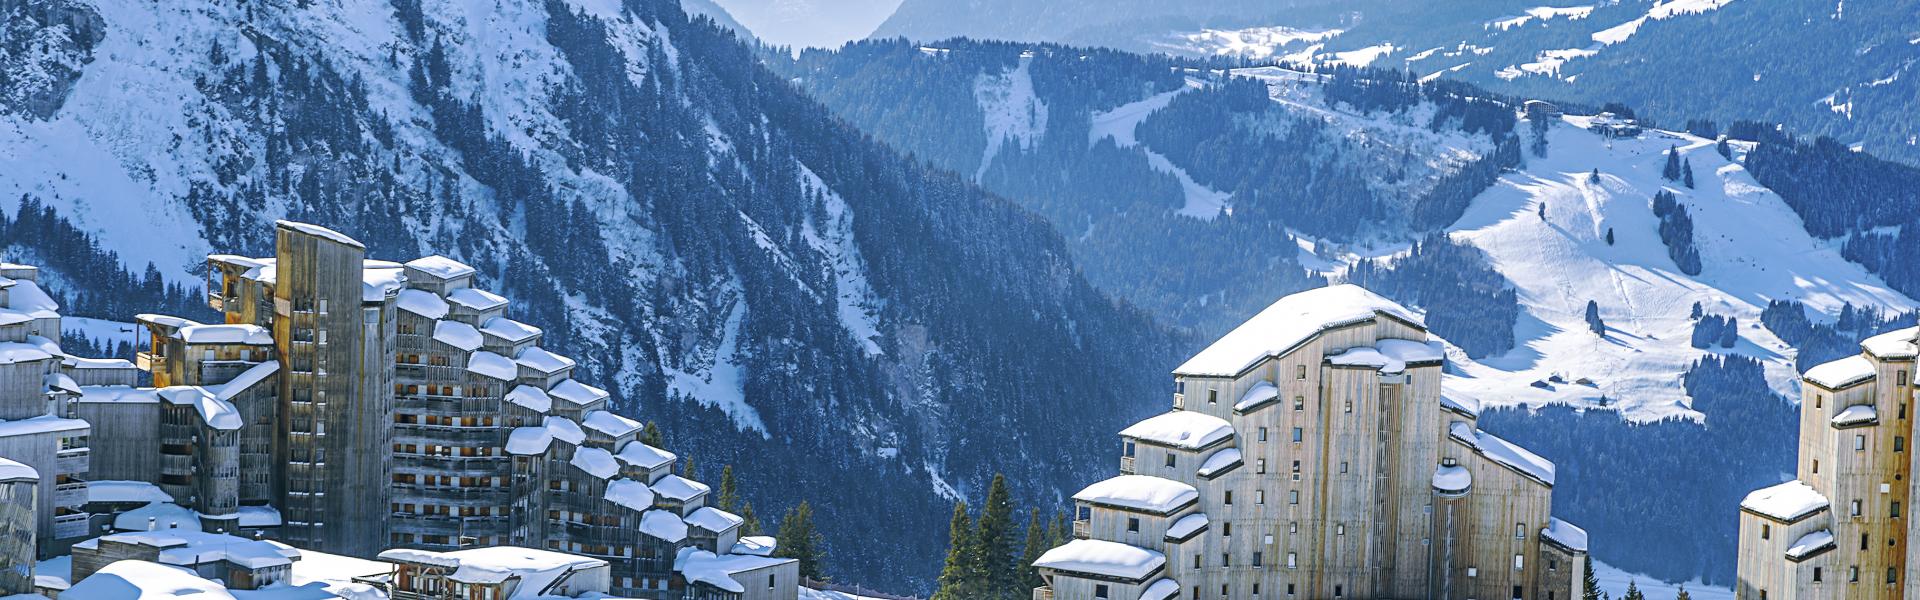 Find the perfect vacation home Avoriaz - Casamundo